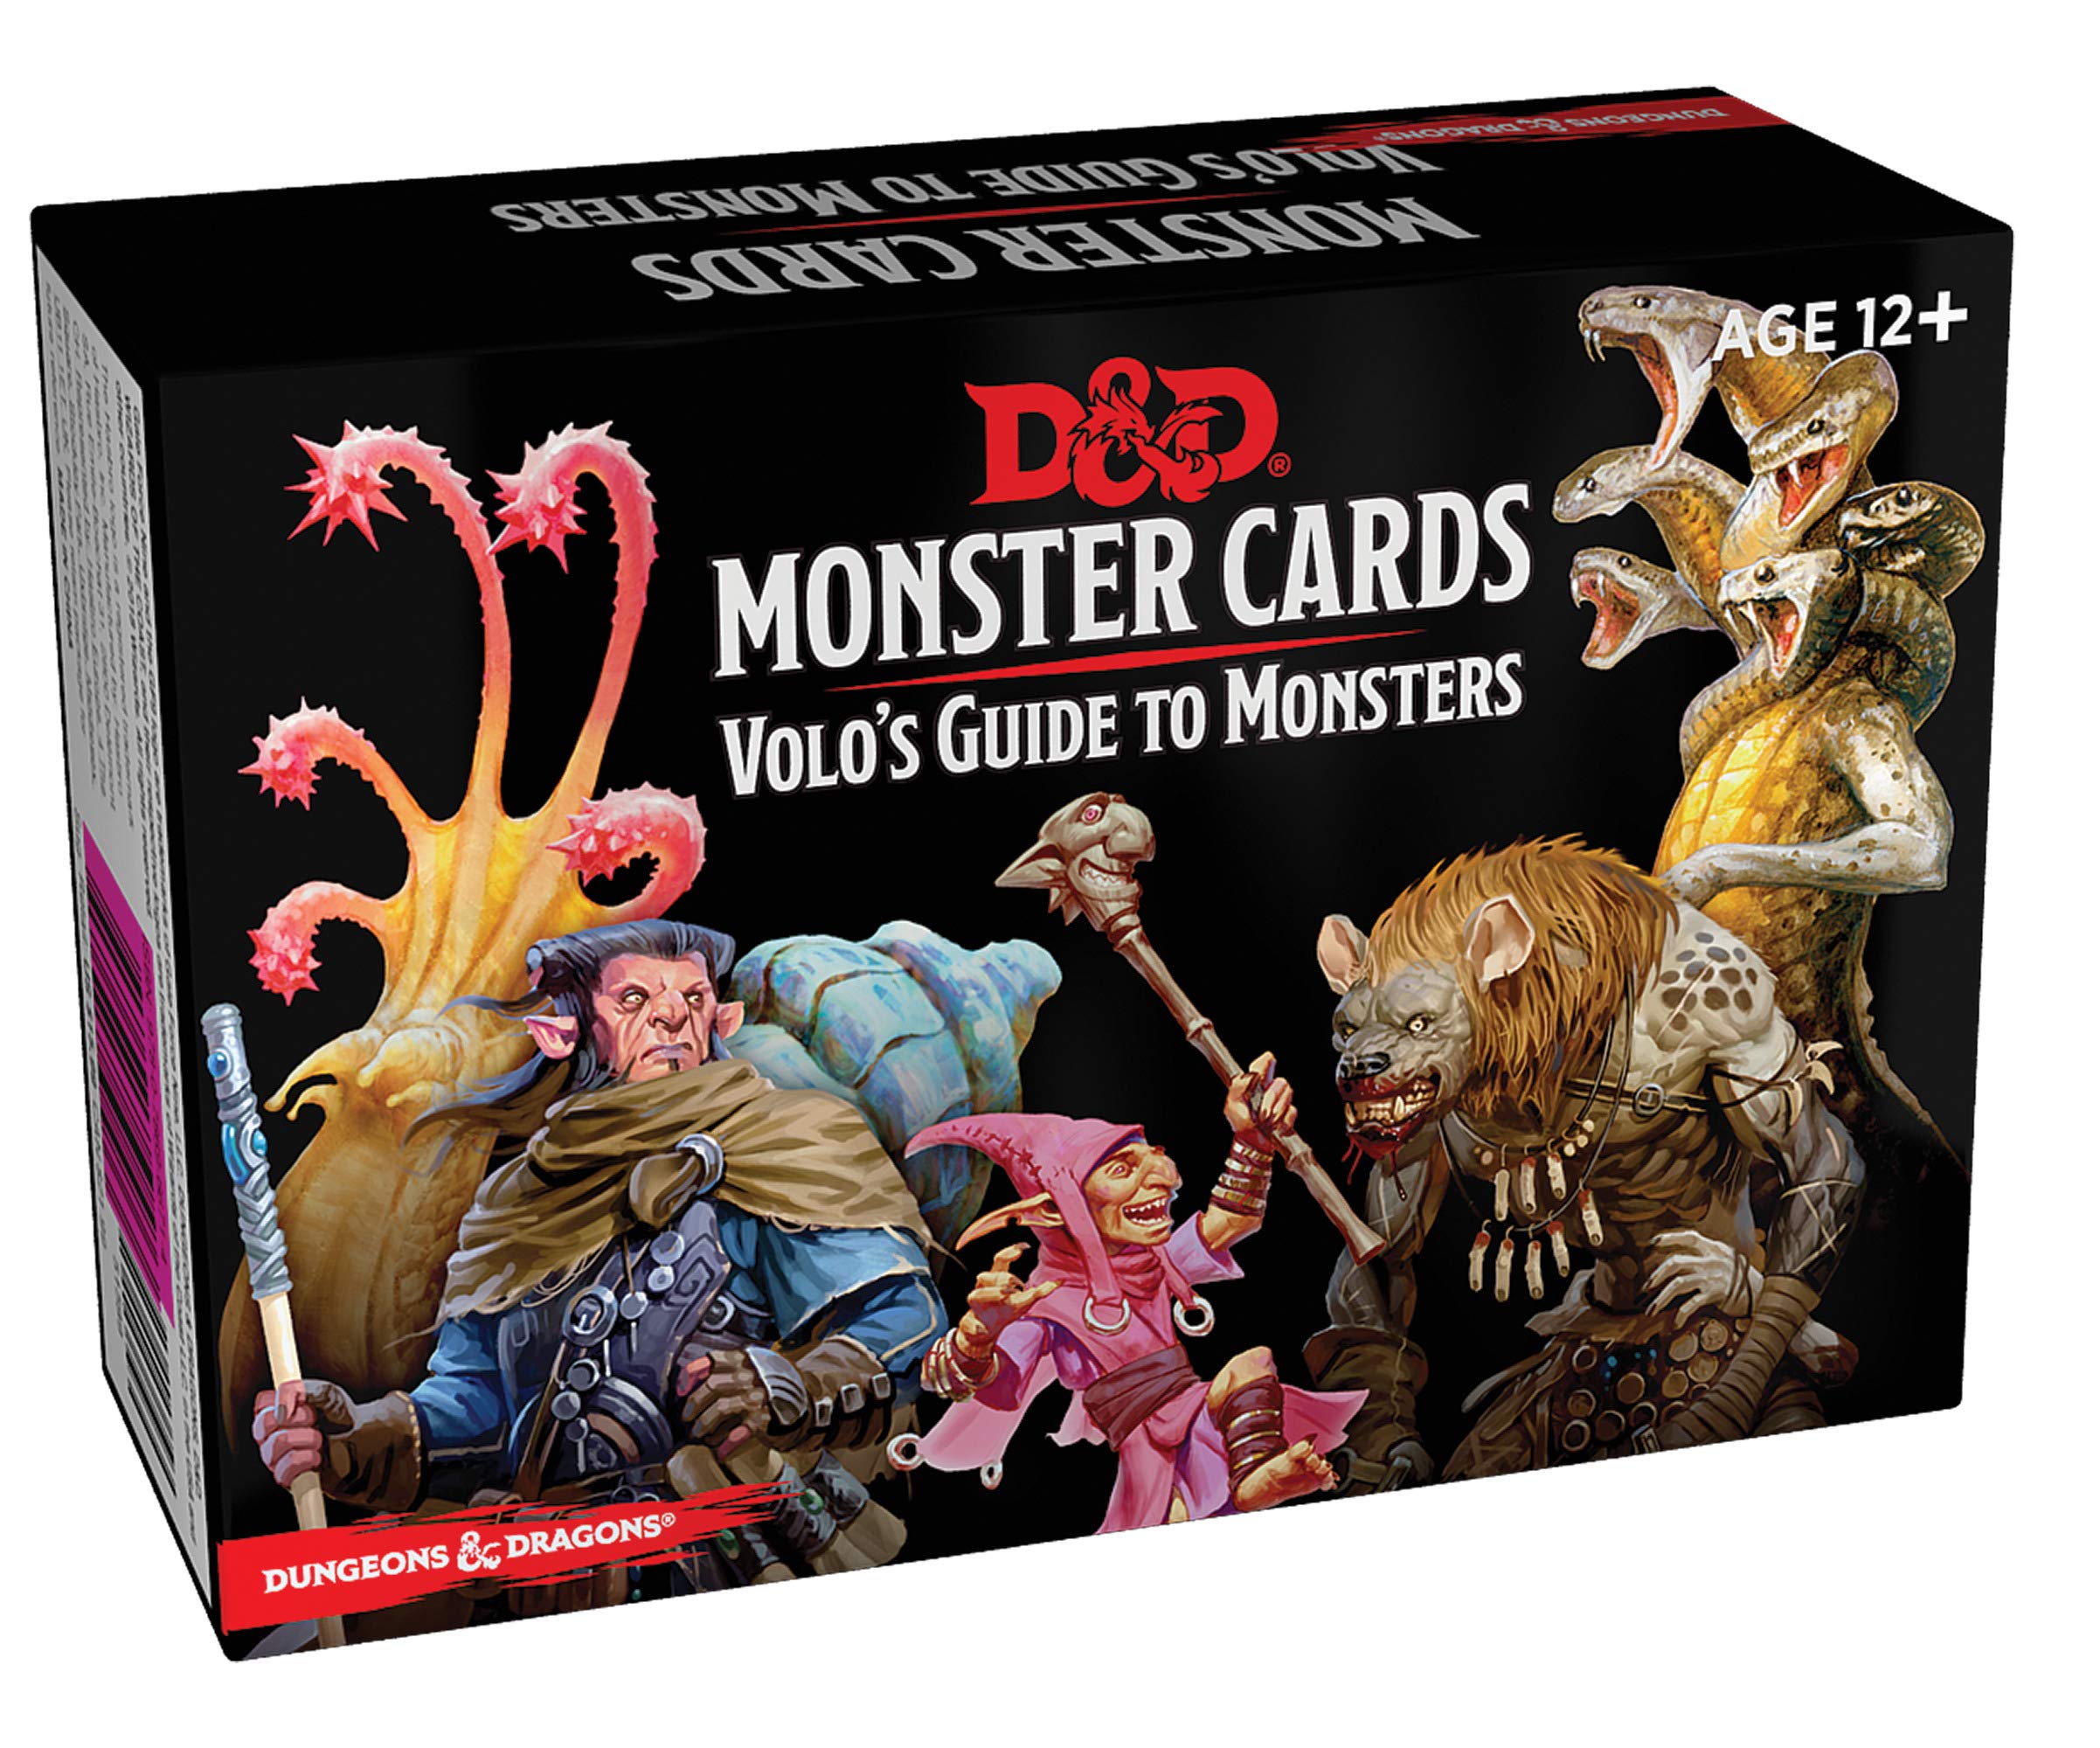 D&D: Monster Cards - Volo's Guide to Monsters